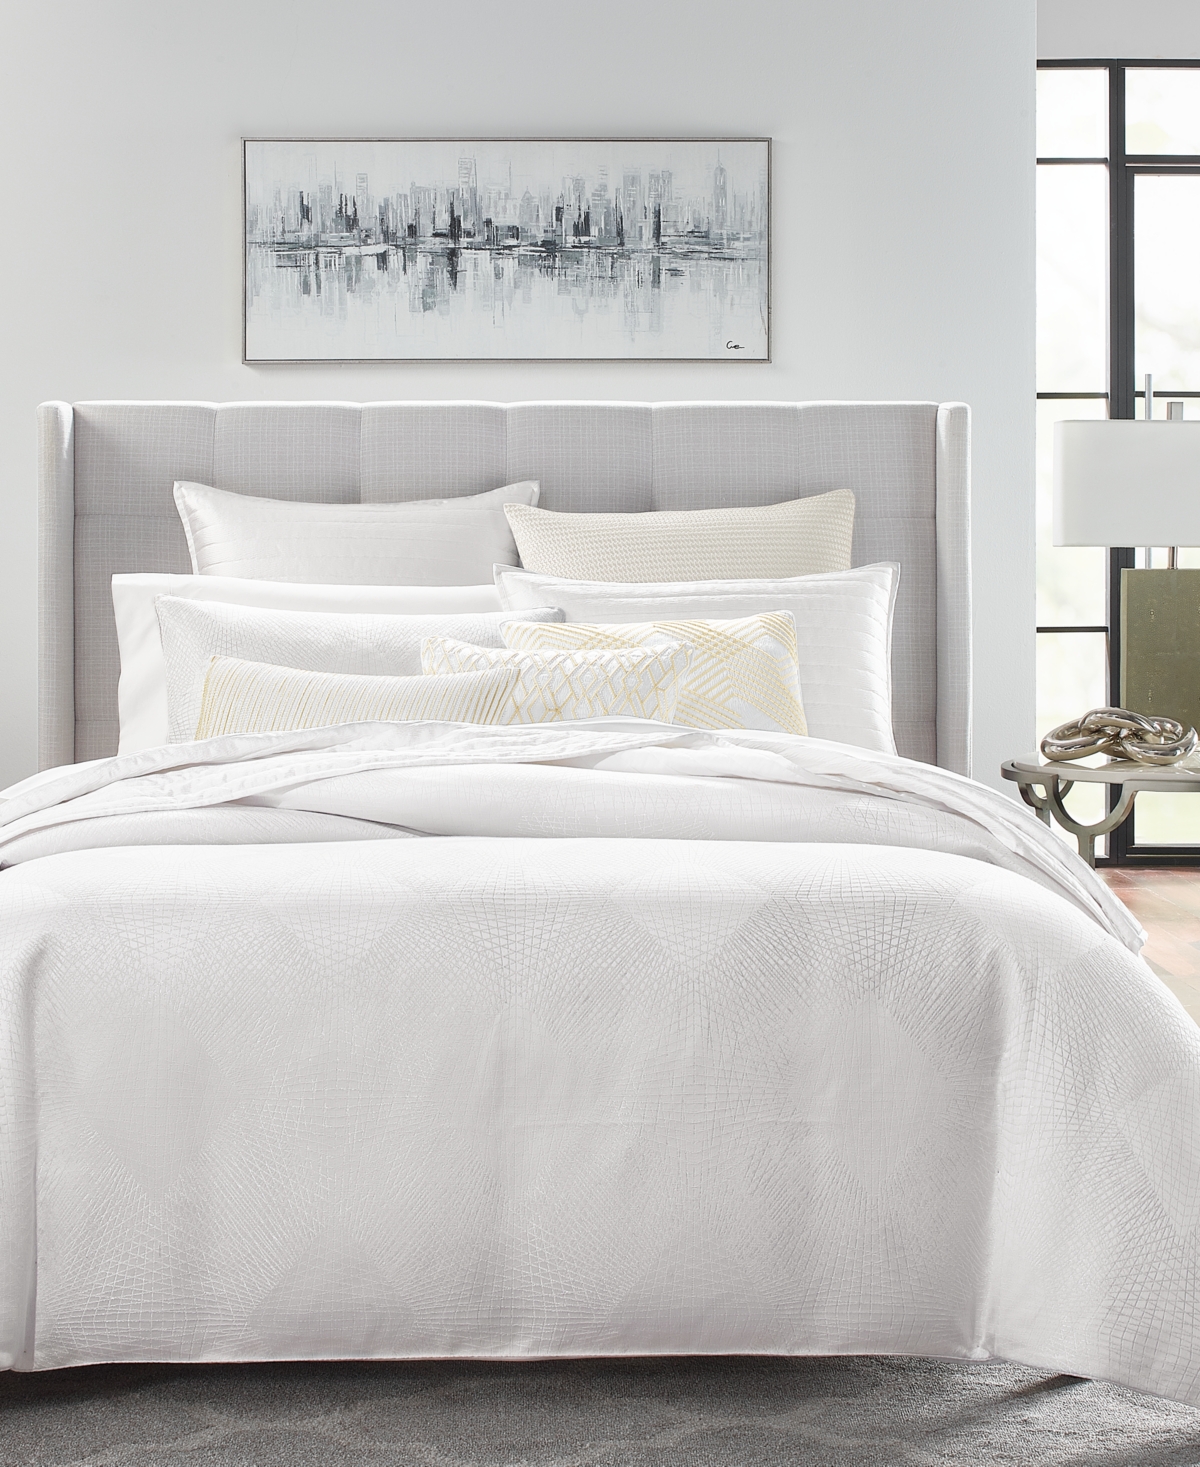 Hotel Collection Diamond Lattice 3-pc. Duvet Cover Set, Full/queen, Created For Macy's In Fresh White